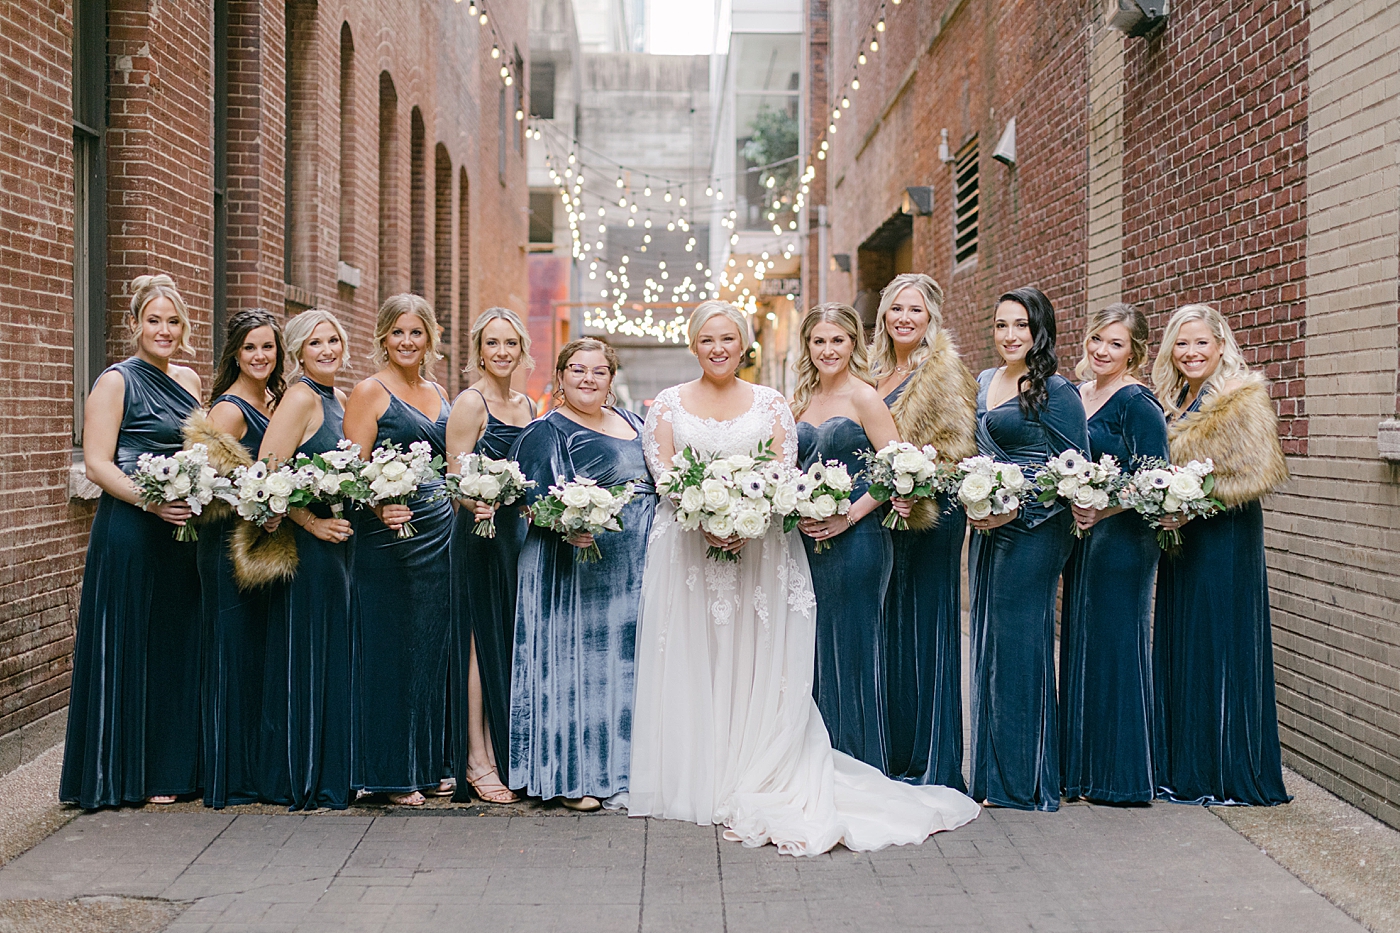 Bridal party photos at Printers Alley in Nashville | Photo by Hope Helmuth Photography